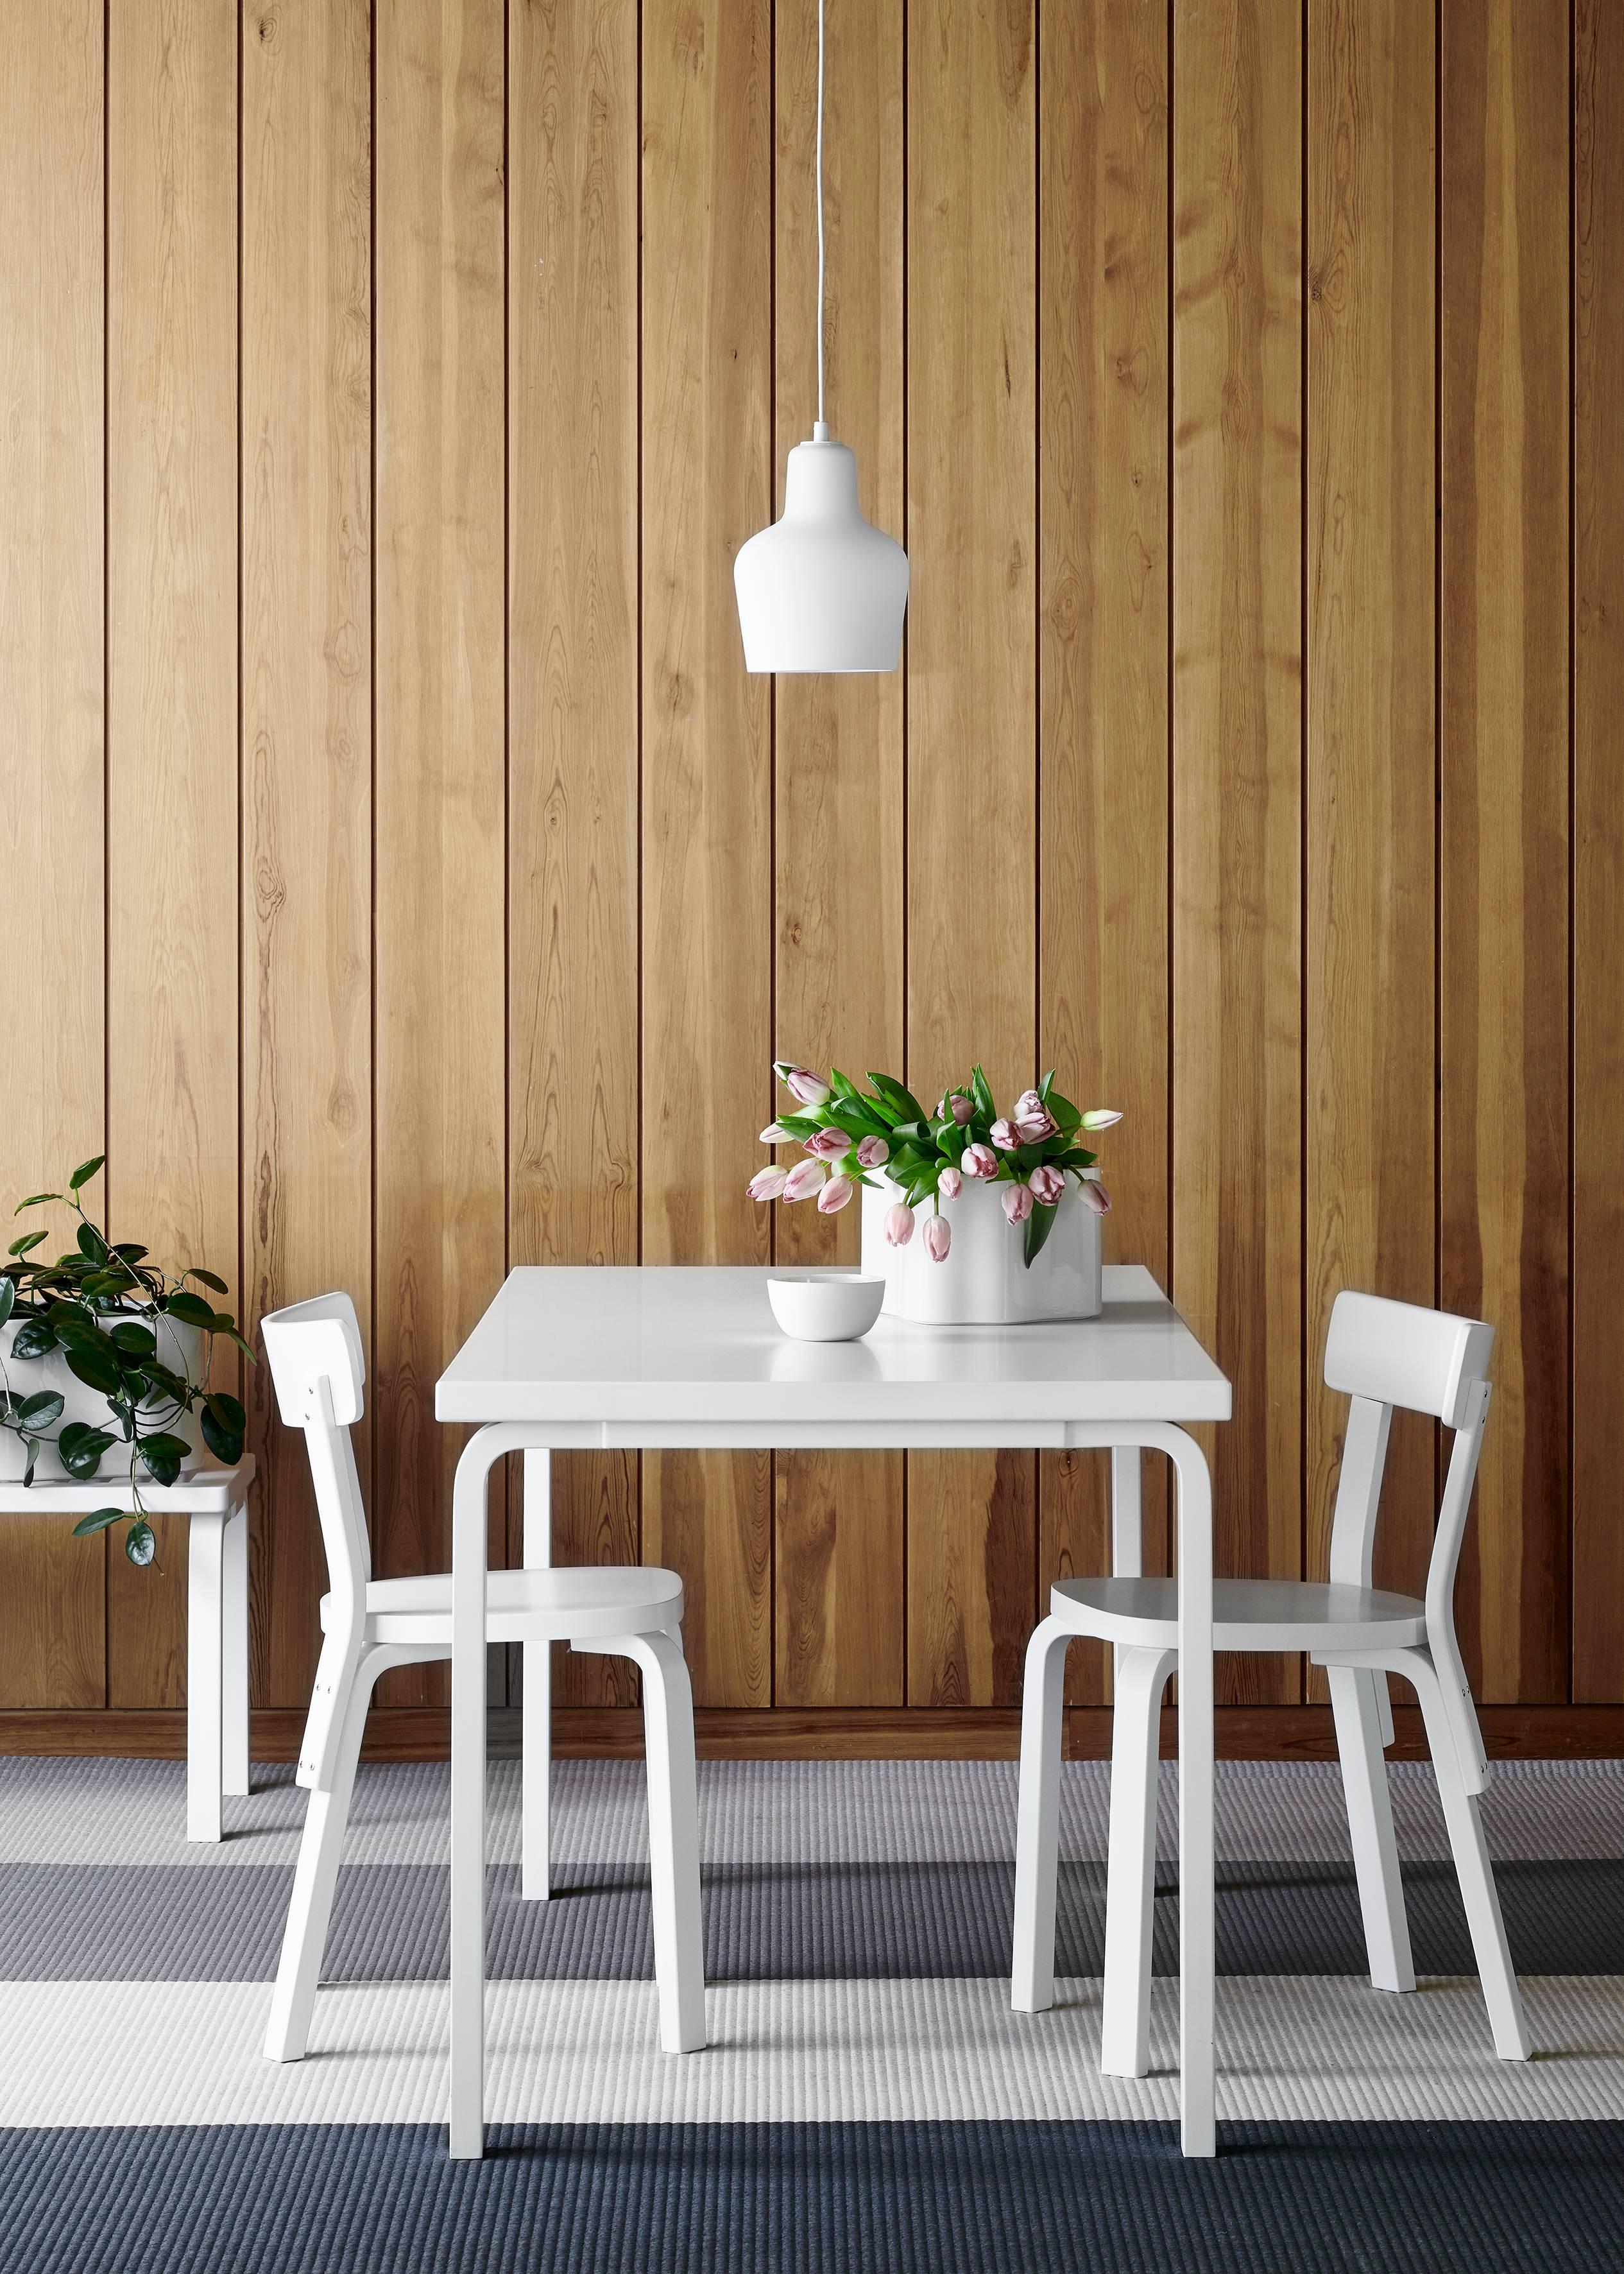 Chair 69 is one of Artek’s most popular chairs, a universal wooden chair in the tradition of classic kitchen and café chairs. With a broad seat and supportive backrest, Chair 69 exudes durability and stability while retaining an elegance of line.